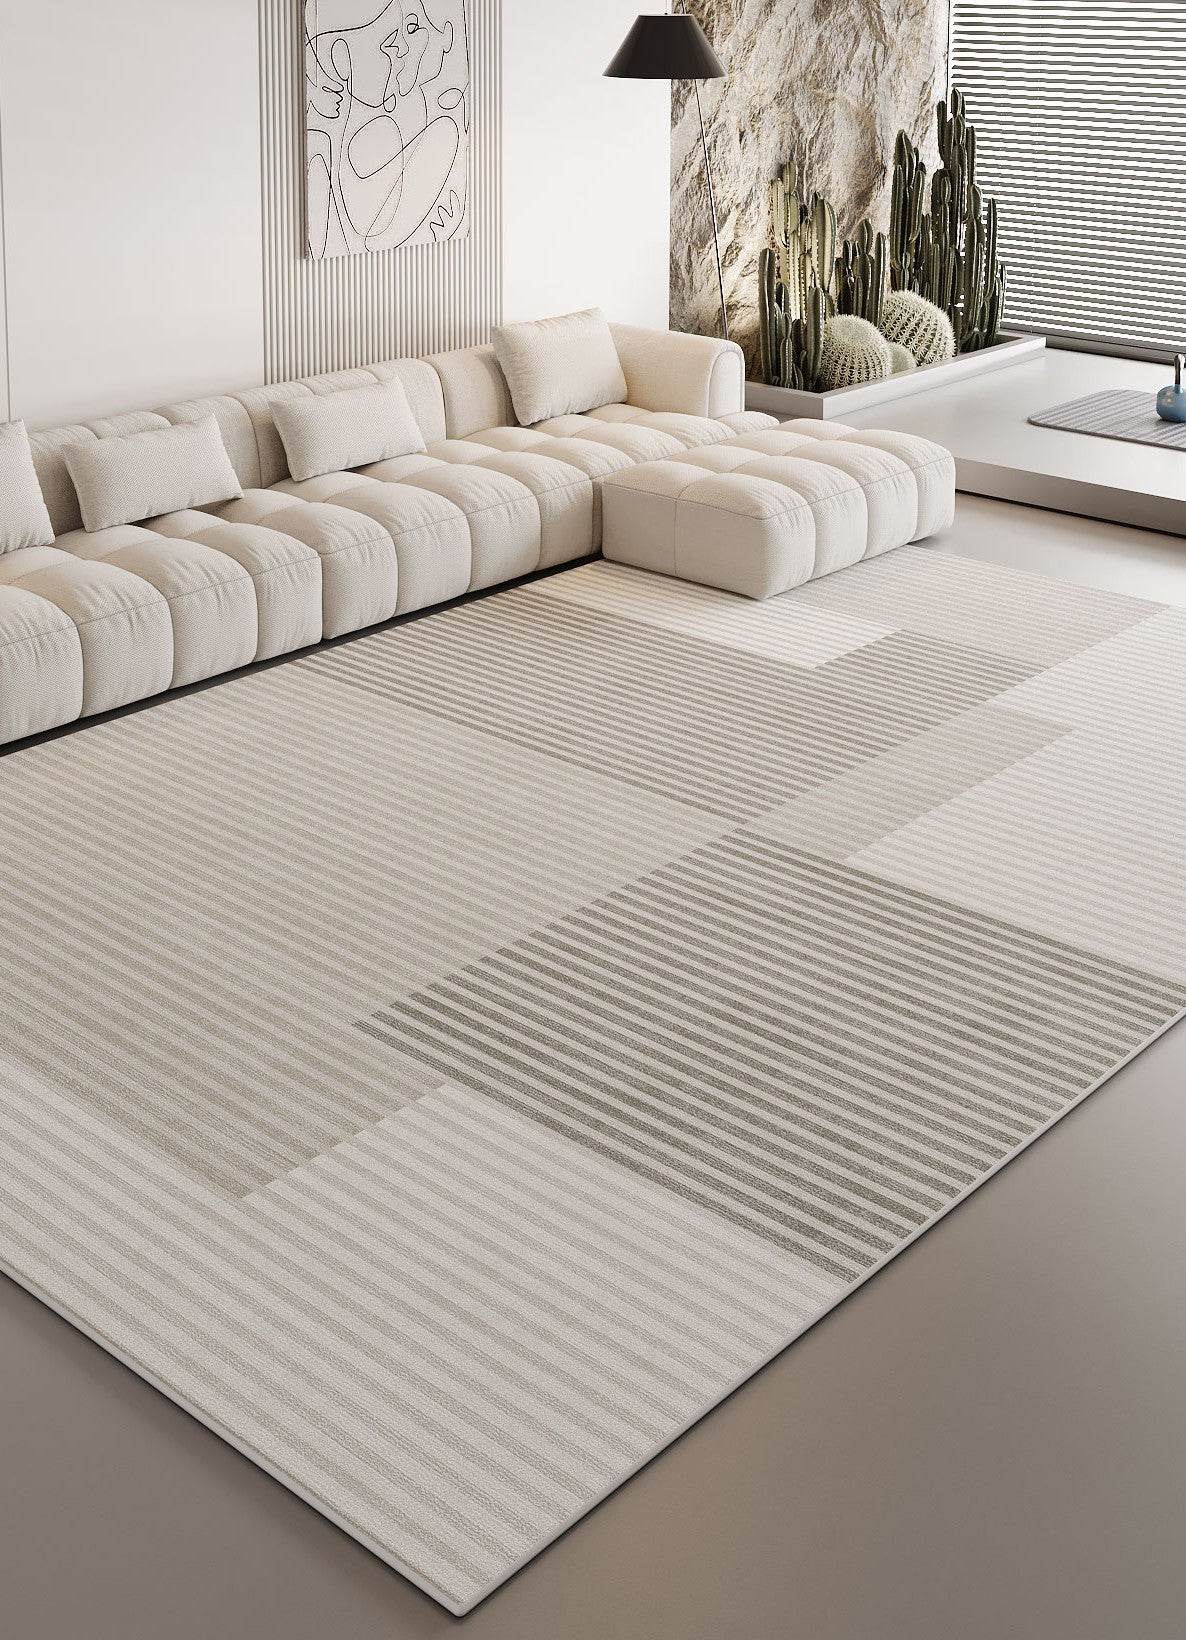 Abstract Contemporary Area Rugs for Bedroom, Geometric Modern Rugs for Dining Room, Large Modern Living Room Rugs, Dining Room Floor Carpets-Silvia Home Craft